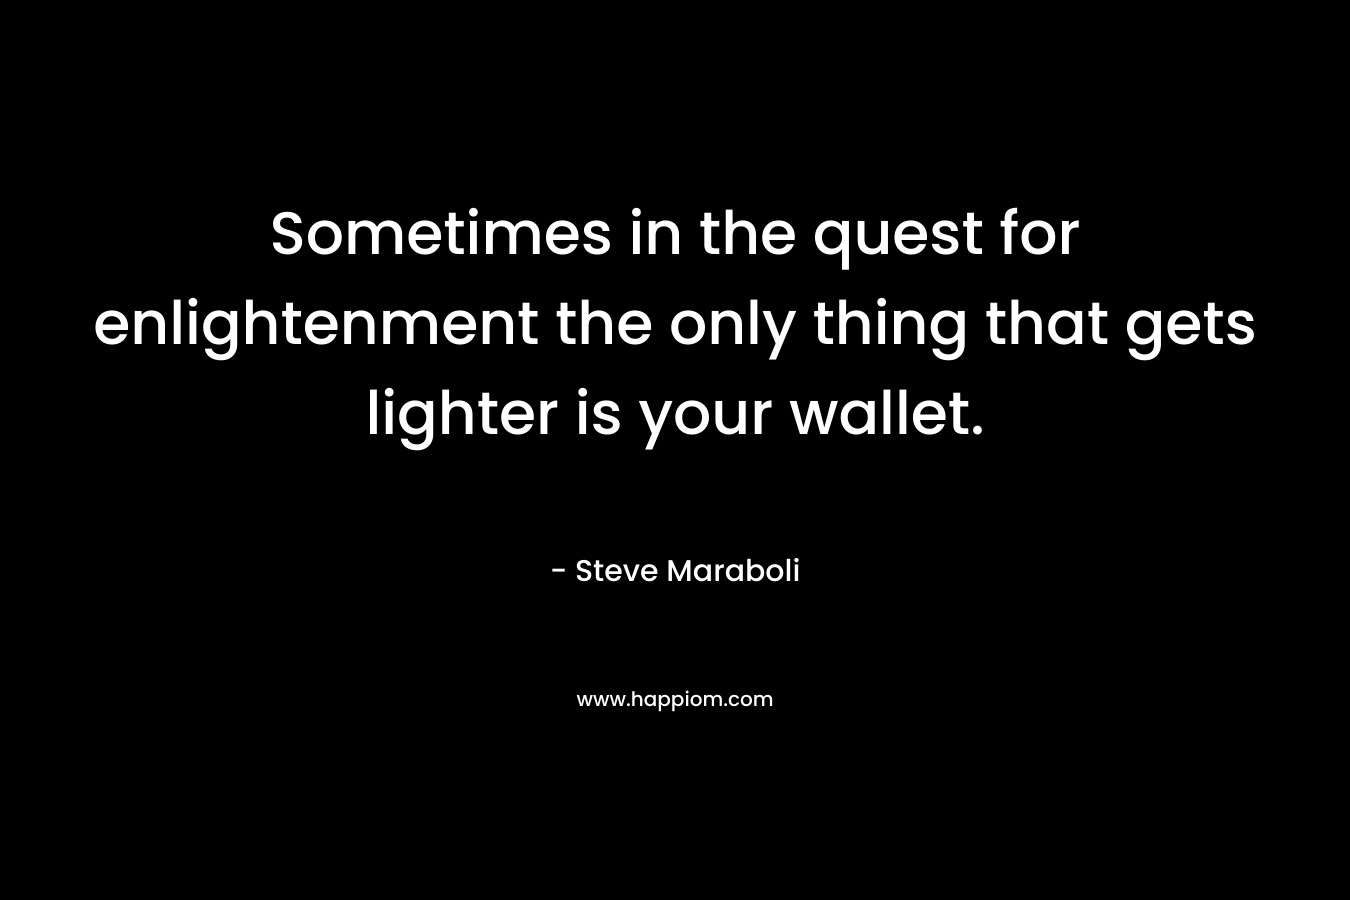 Sometimes in the quest for enlightenment the only thing that gets lighter is your wallet. – Steve Maraboli